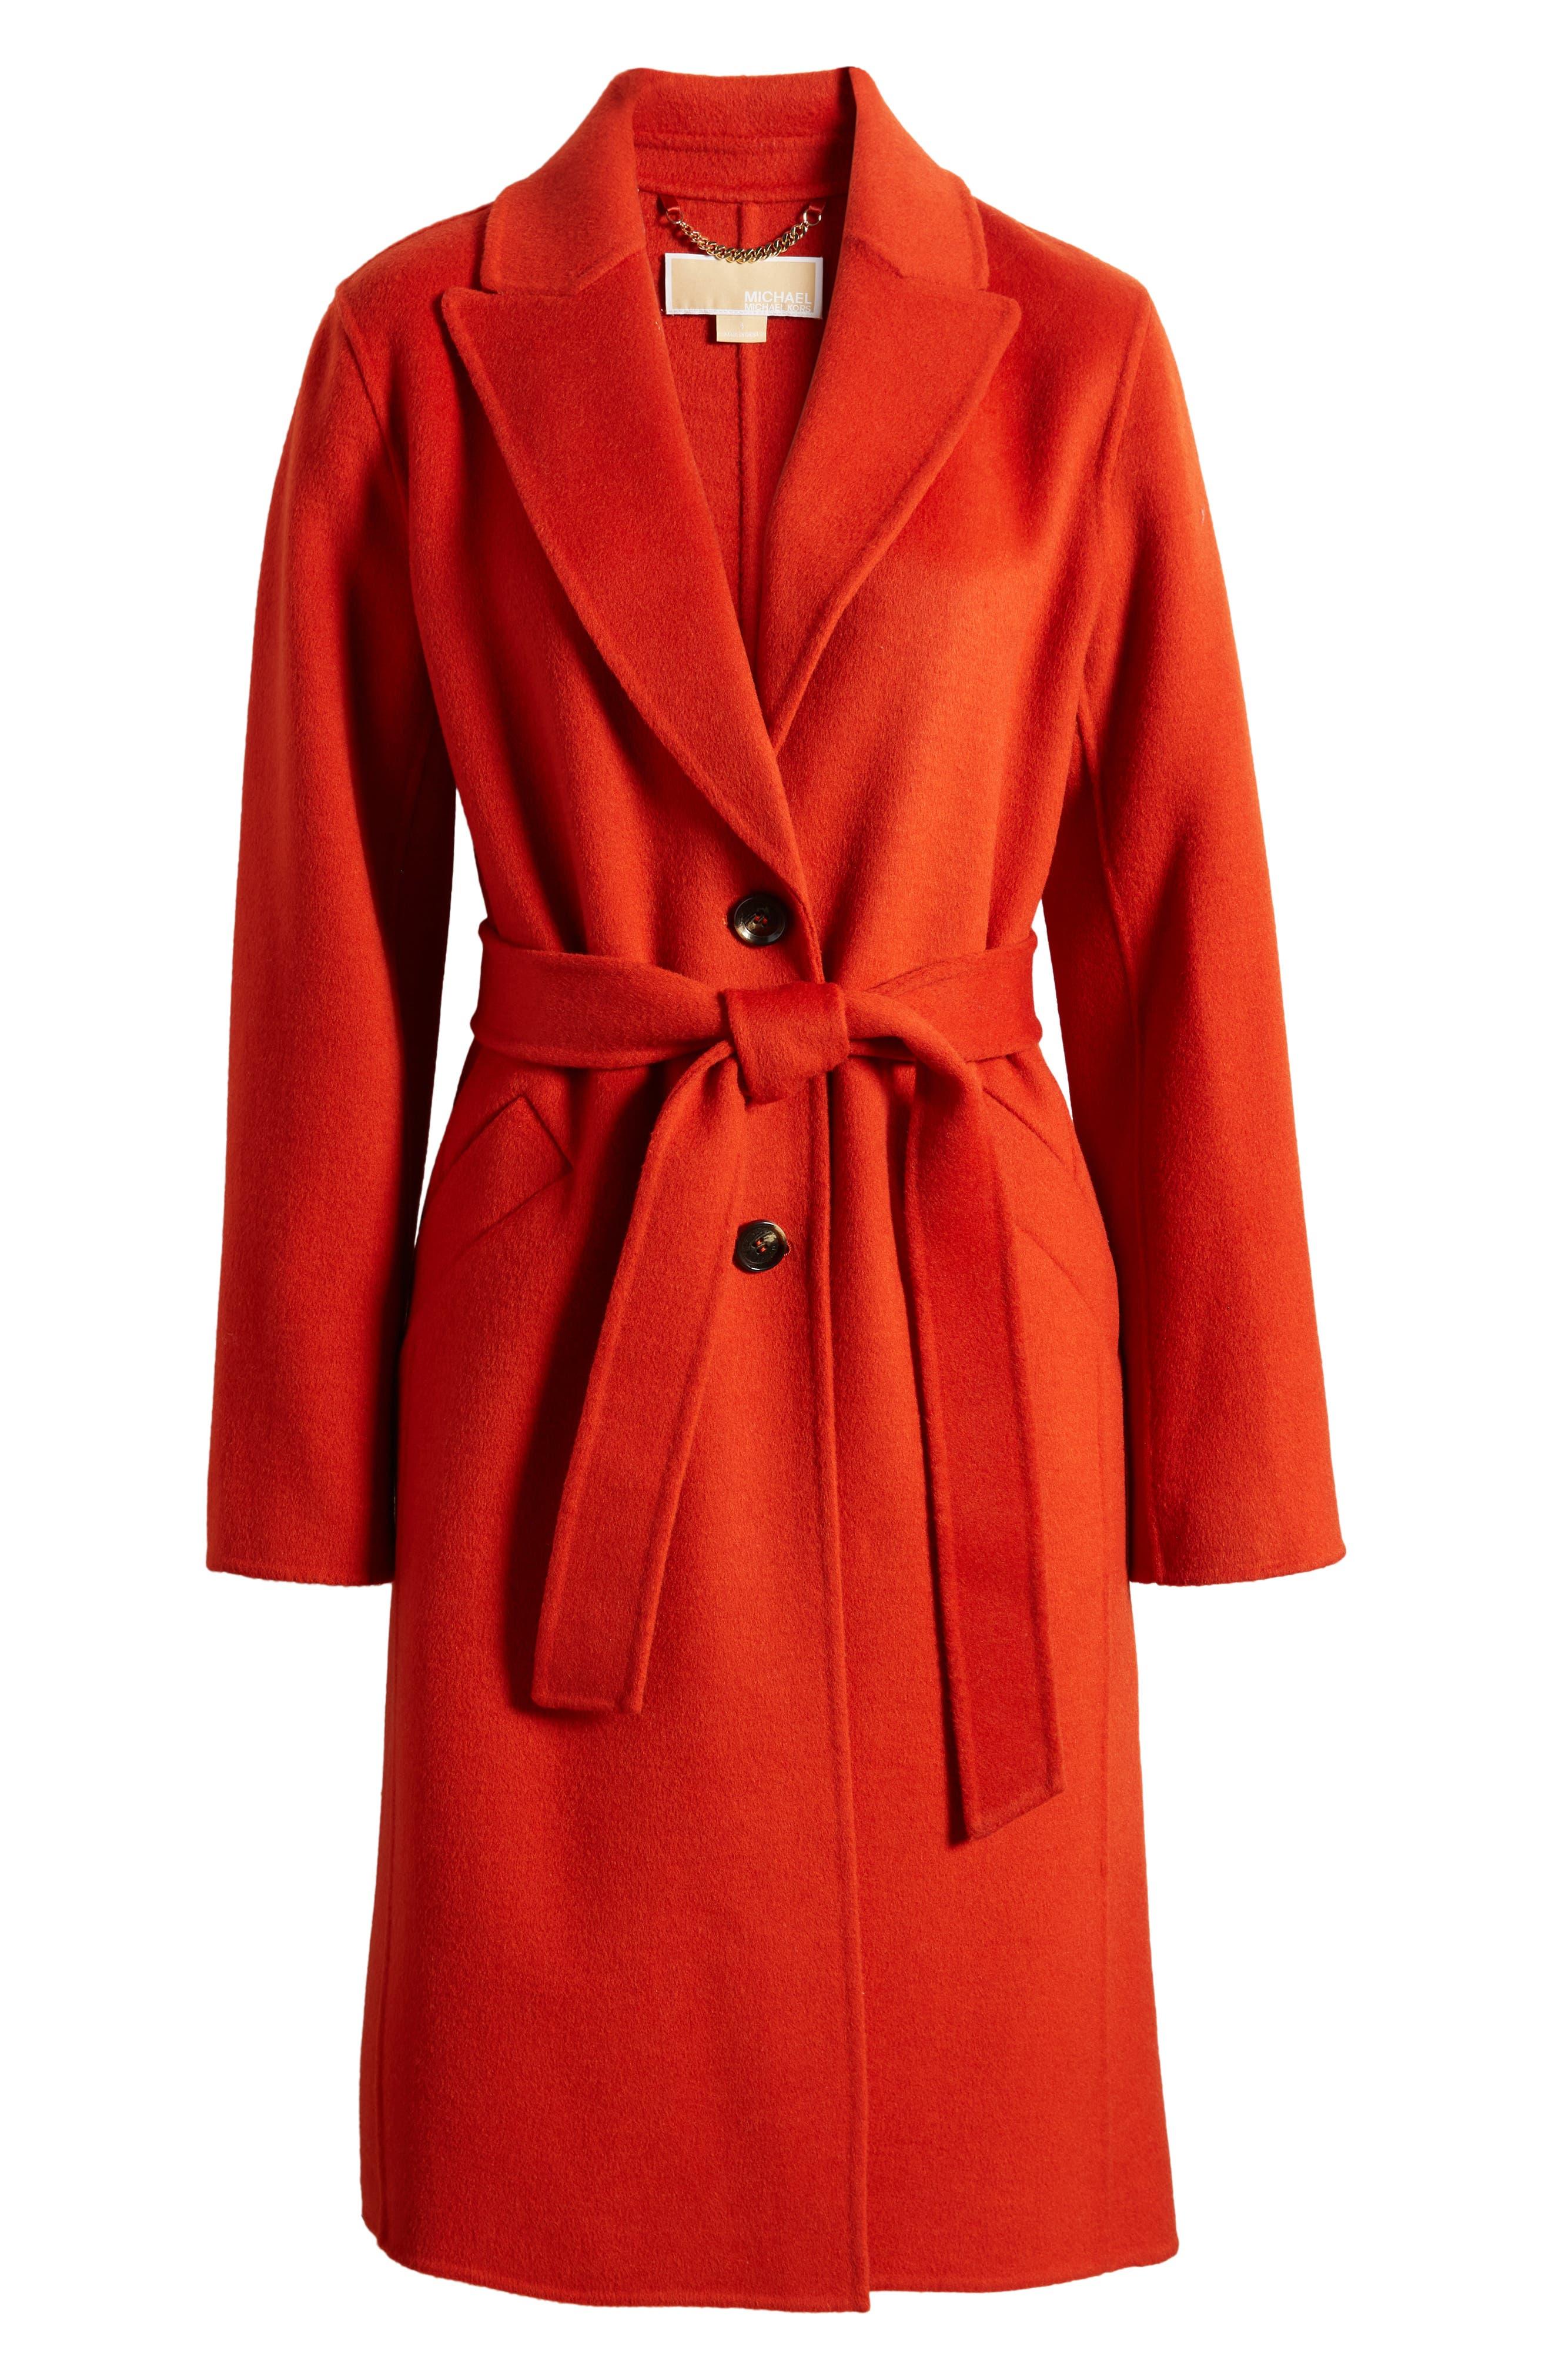 MICHAEL Michael Kors Belted Wool Blend Coat in Red | Lyst